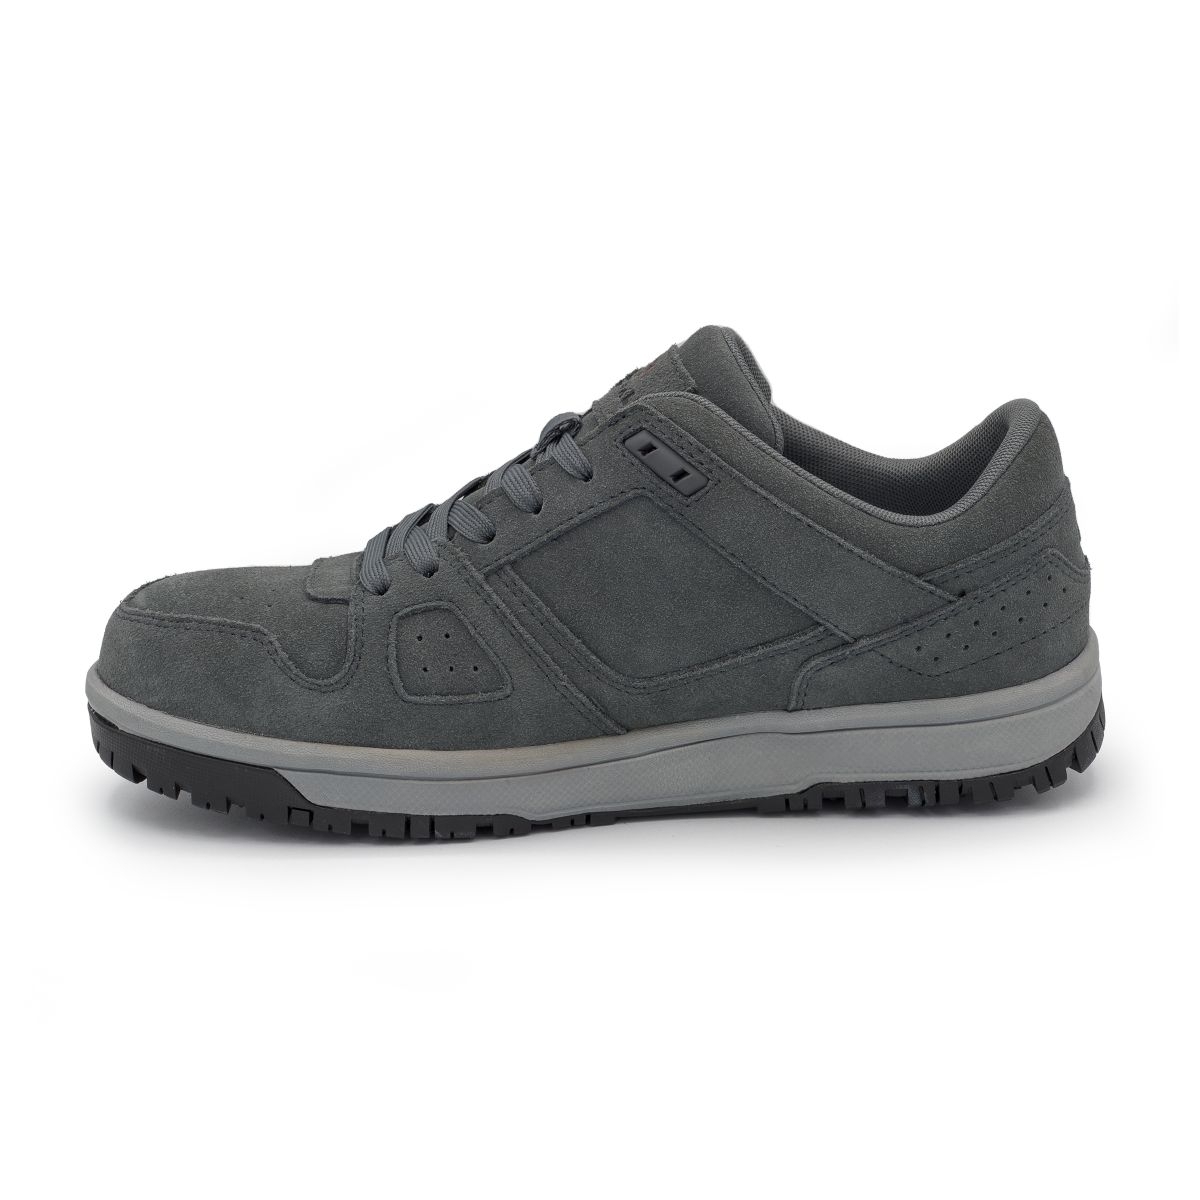 AIRWALK SAFETY Men's Mongo Composite Toe EH Work Shoe Charcoal/Grey - AW6301 CHARCOAL/GRAY - CHARCOAL/GRAY, 8-M